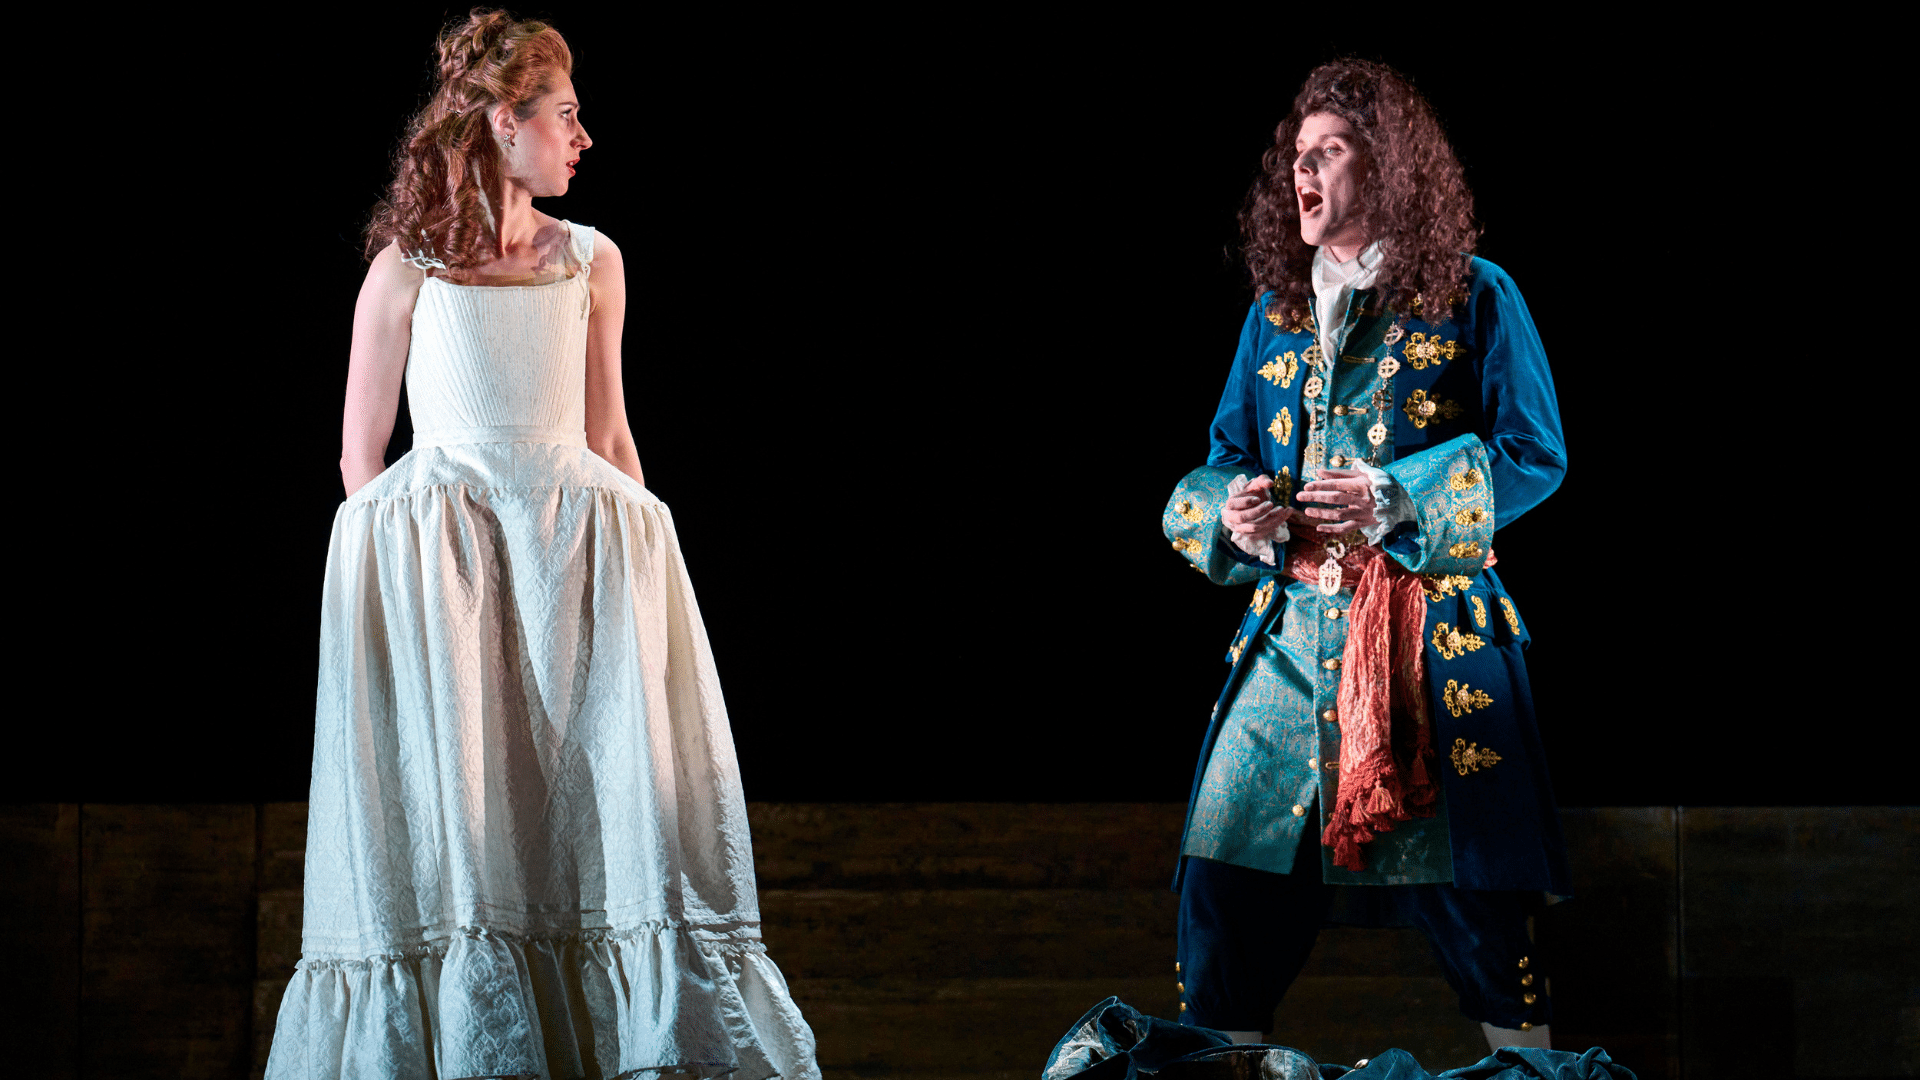 ETO: Giulio Cesare production shot - On the left, a woman with red hair and red lipstick is wearing a pretty white dress, with her hands hidden behind the middle of the dress. She faces to the right where a man with long, dark, curly hair sings while facing her. He wears a very grand blue coat decorated with ornate, golden leaves and a long red scarf wrapped around his waist. The background is completely black.